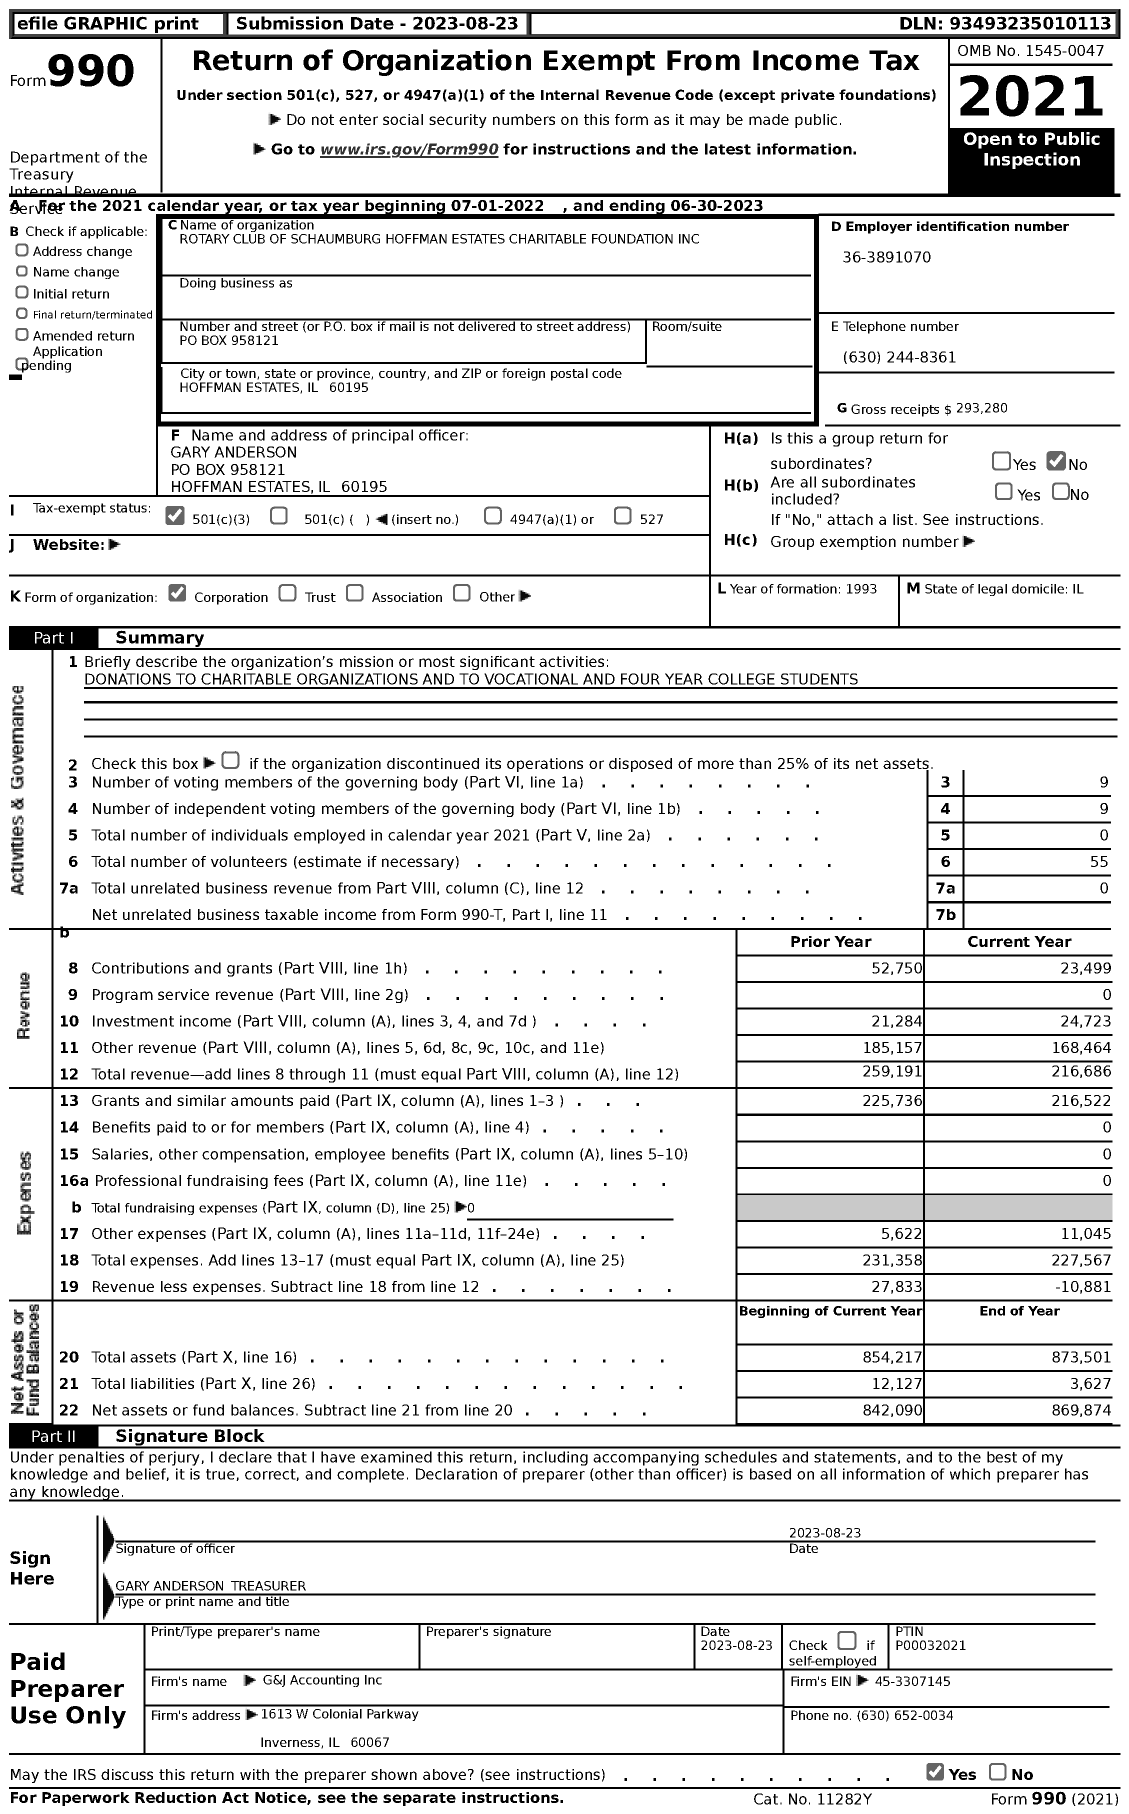 Image of first page of 2022 Form 990 for Rotary Club of Schaumburg Hoffman Estates Charitable Foundation